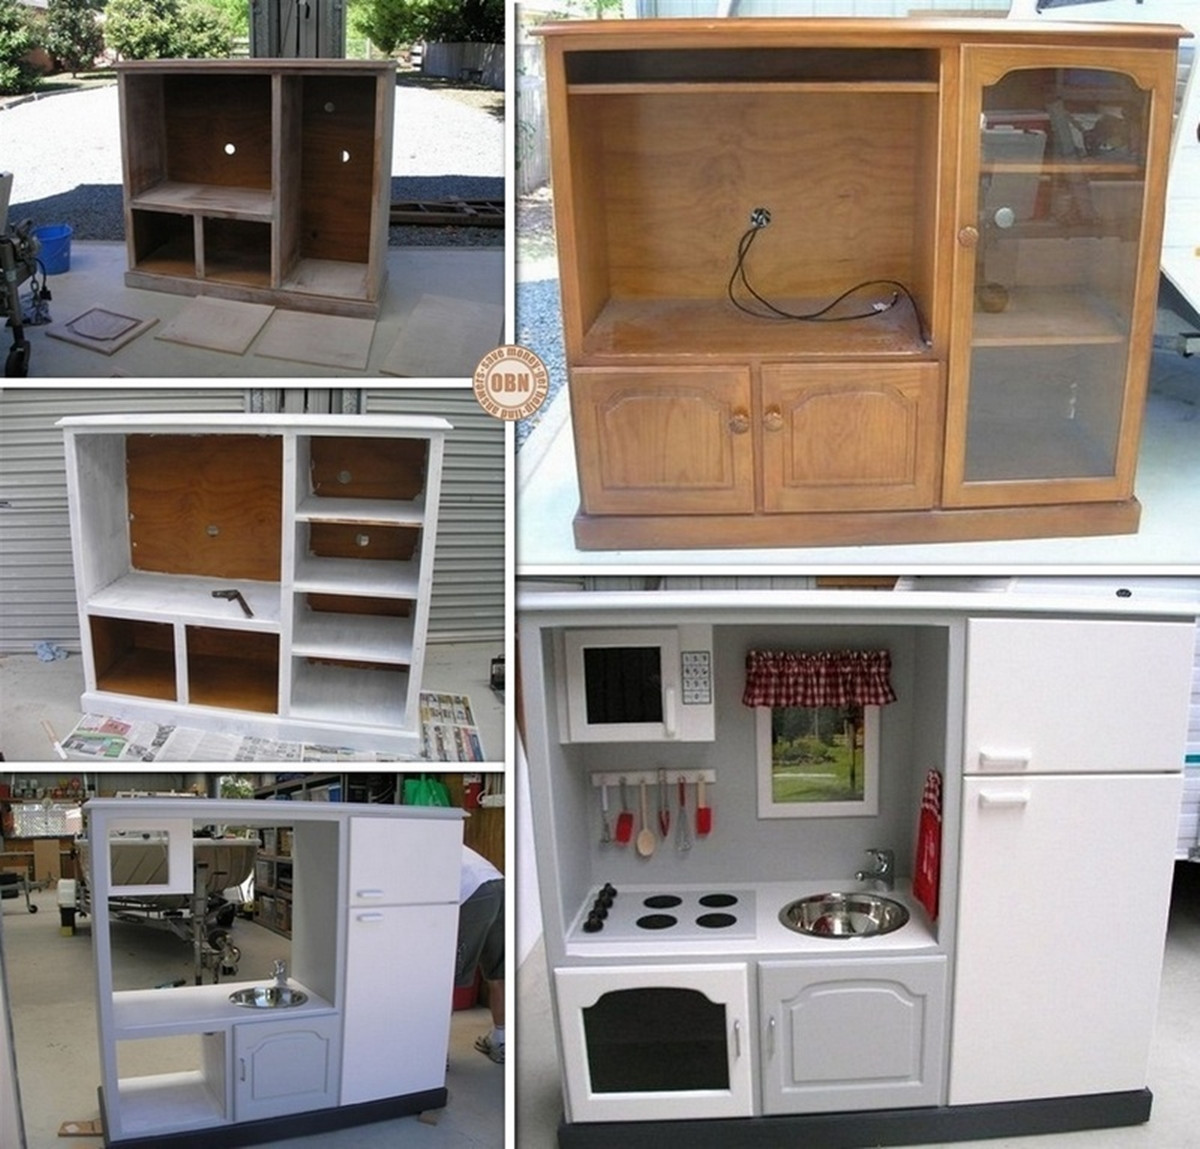 DIY Kitchens For Kids
 Wonderful DIY Kids Play Kitchen from Old Nightstand